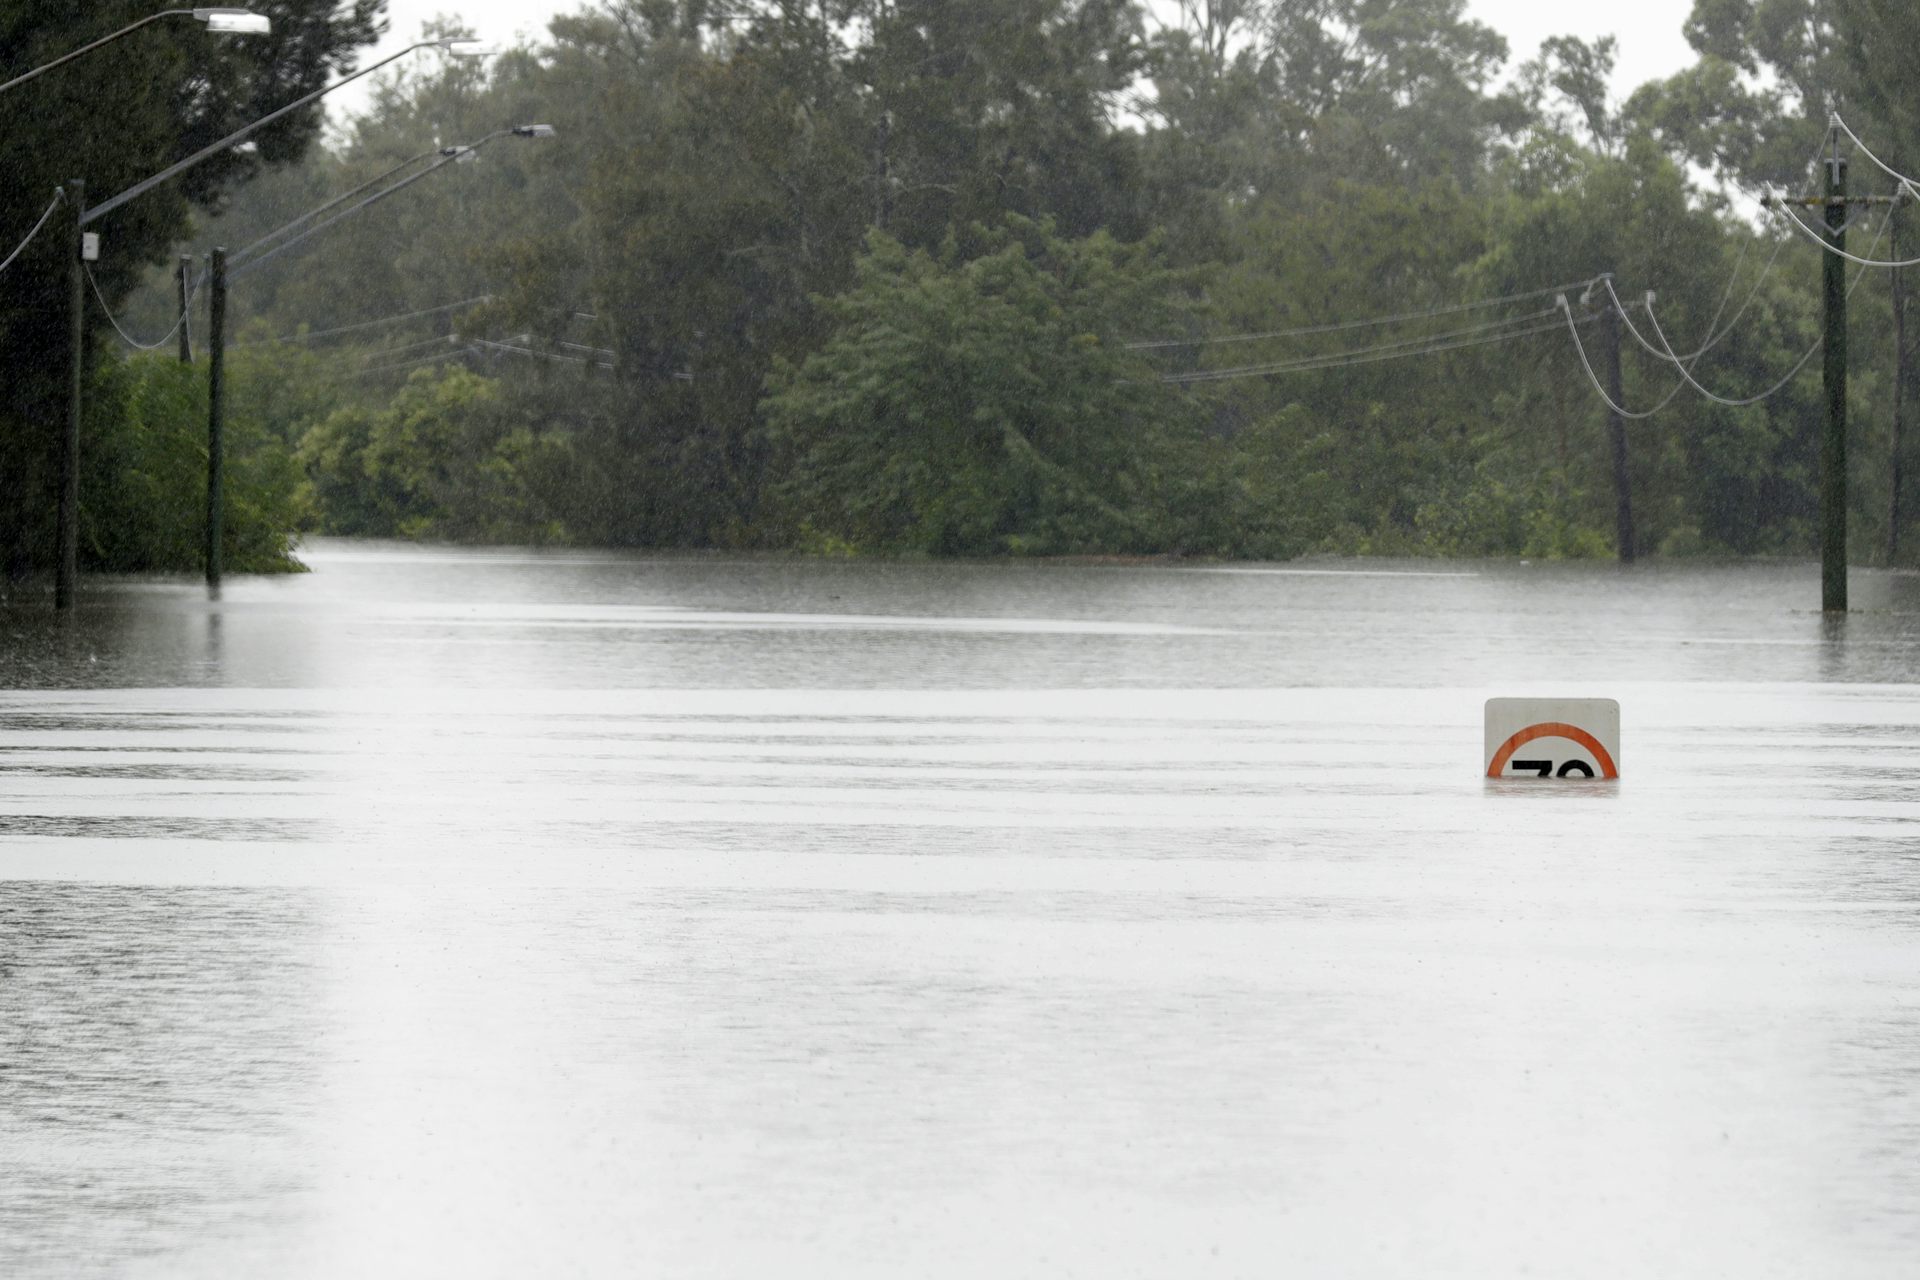 Speed sign in floodwaters